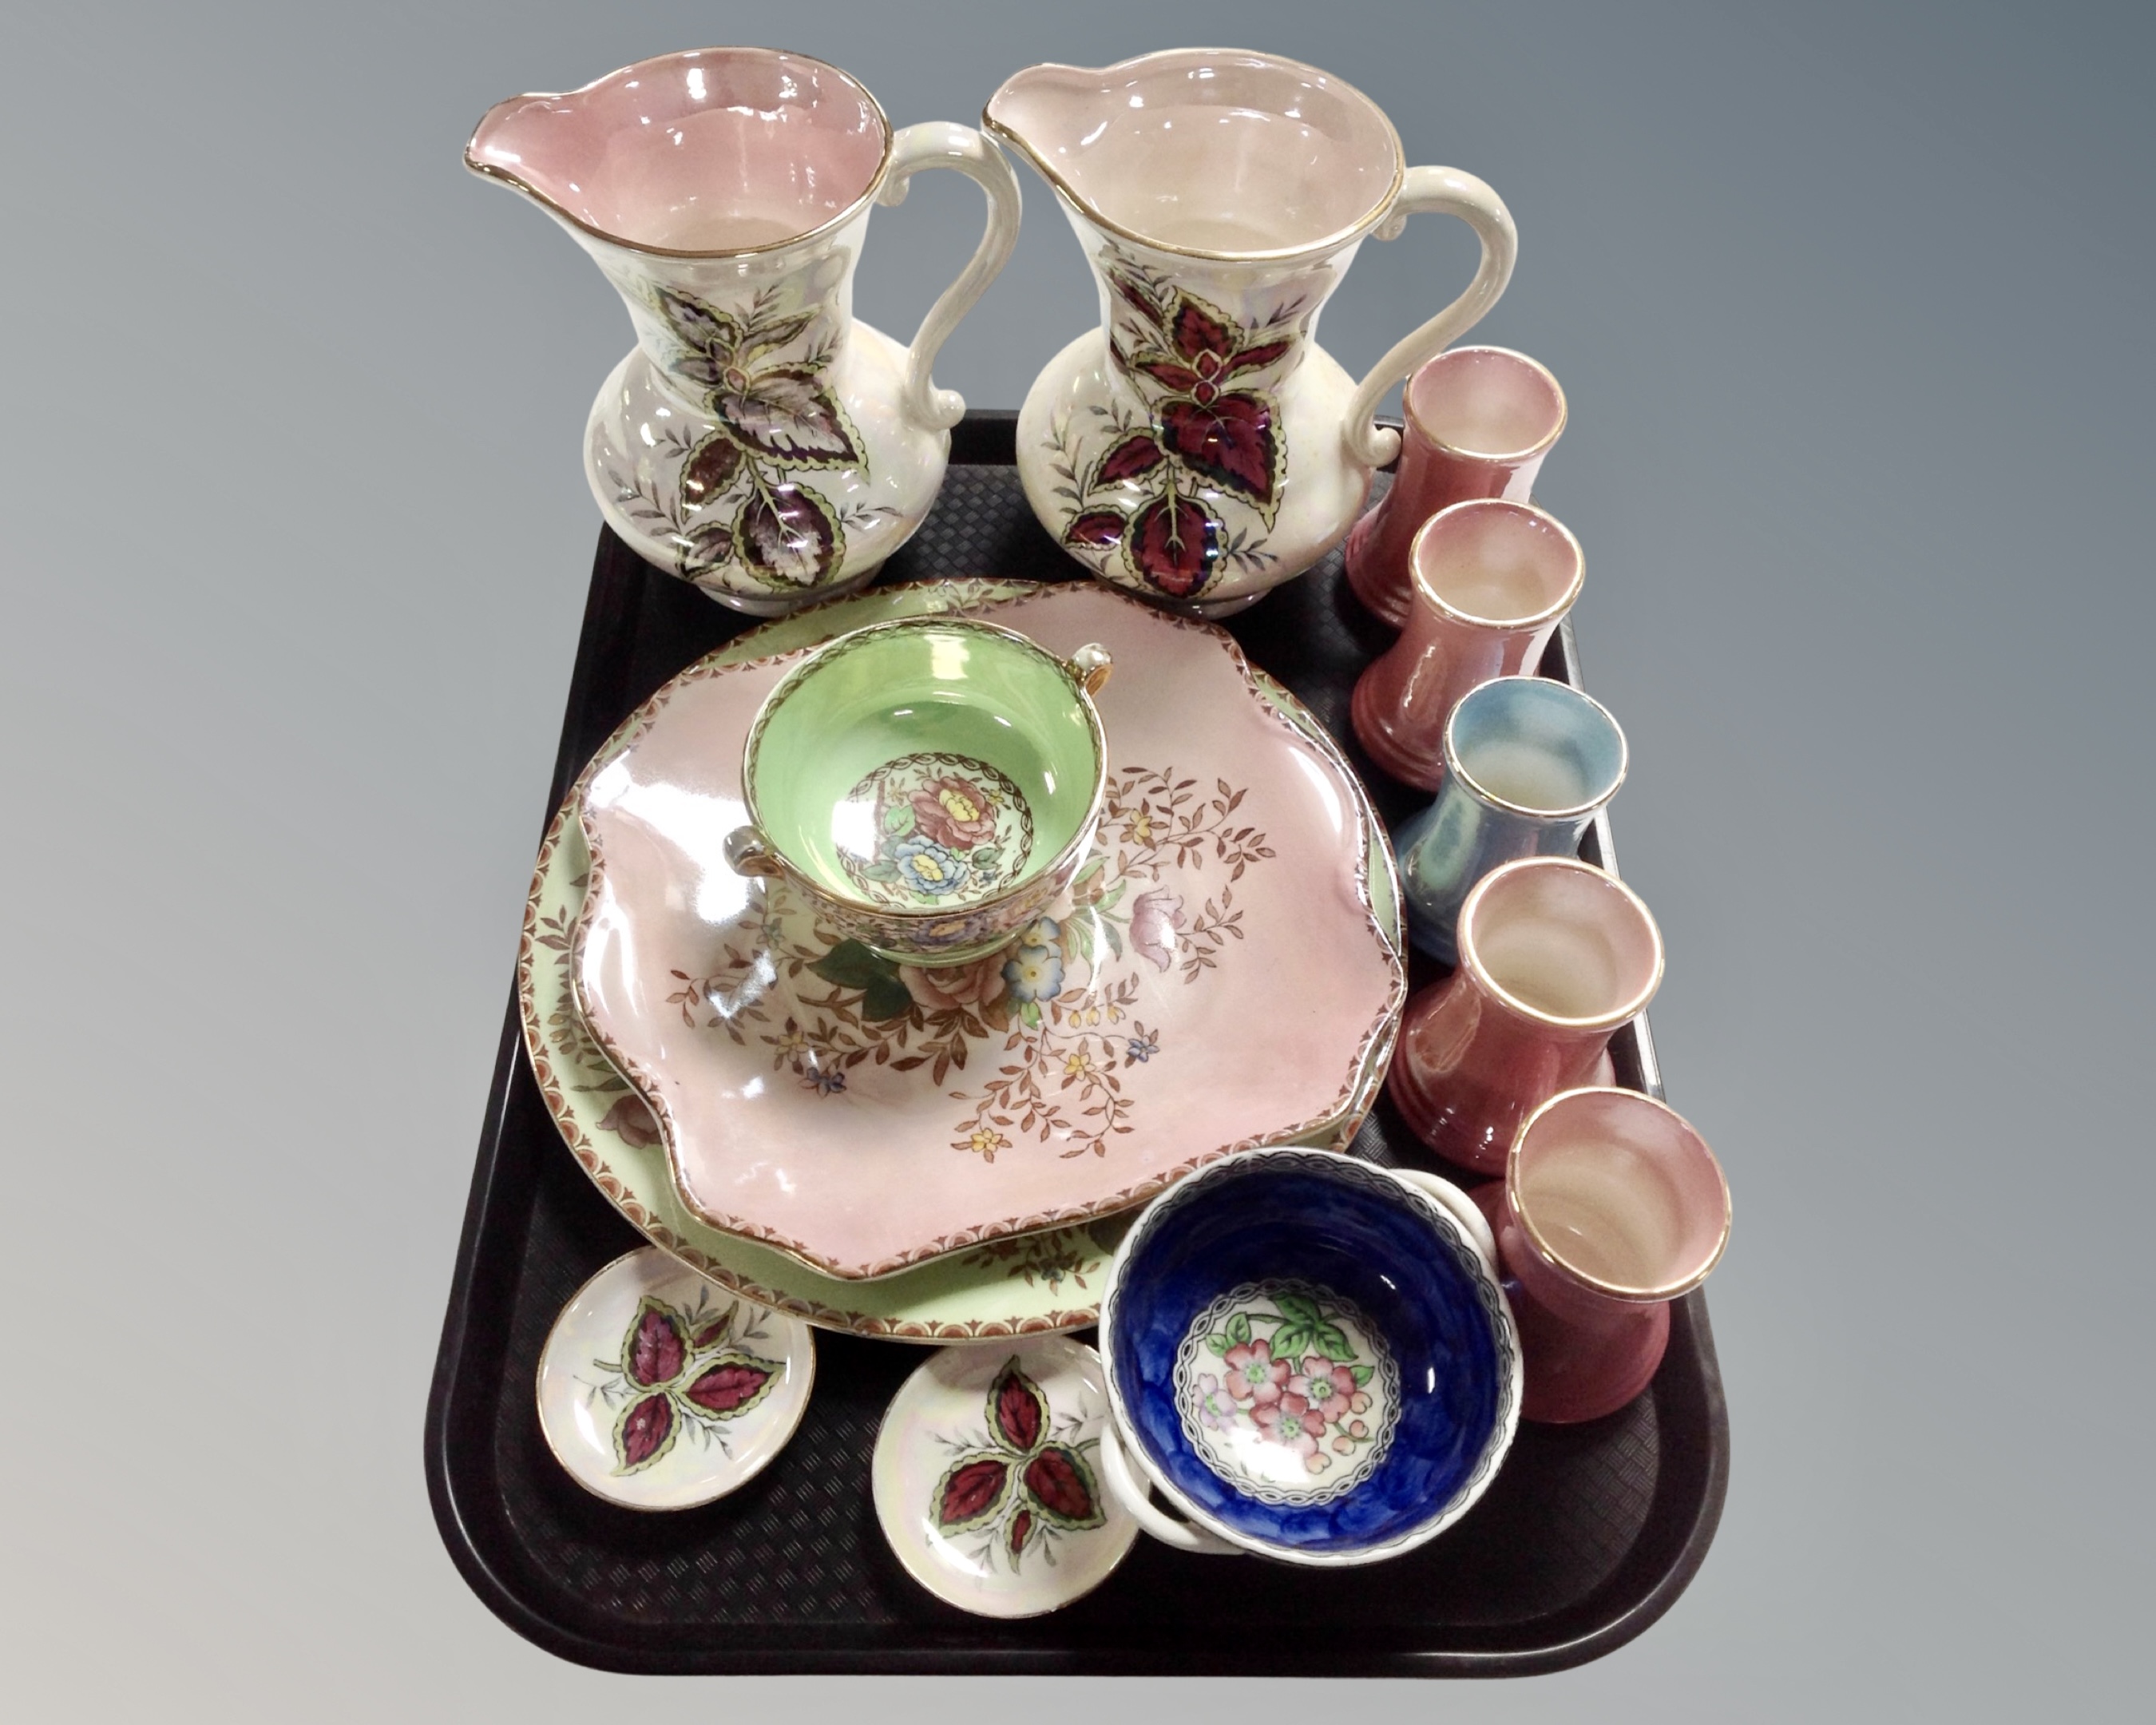 A tray containing Mailing lustre vases, plates, pin dishes etc.